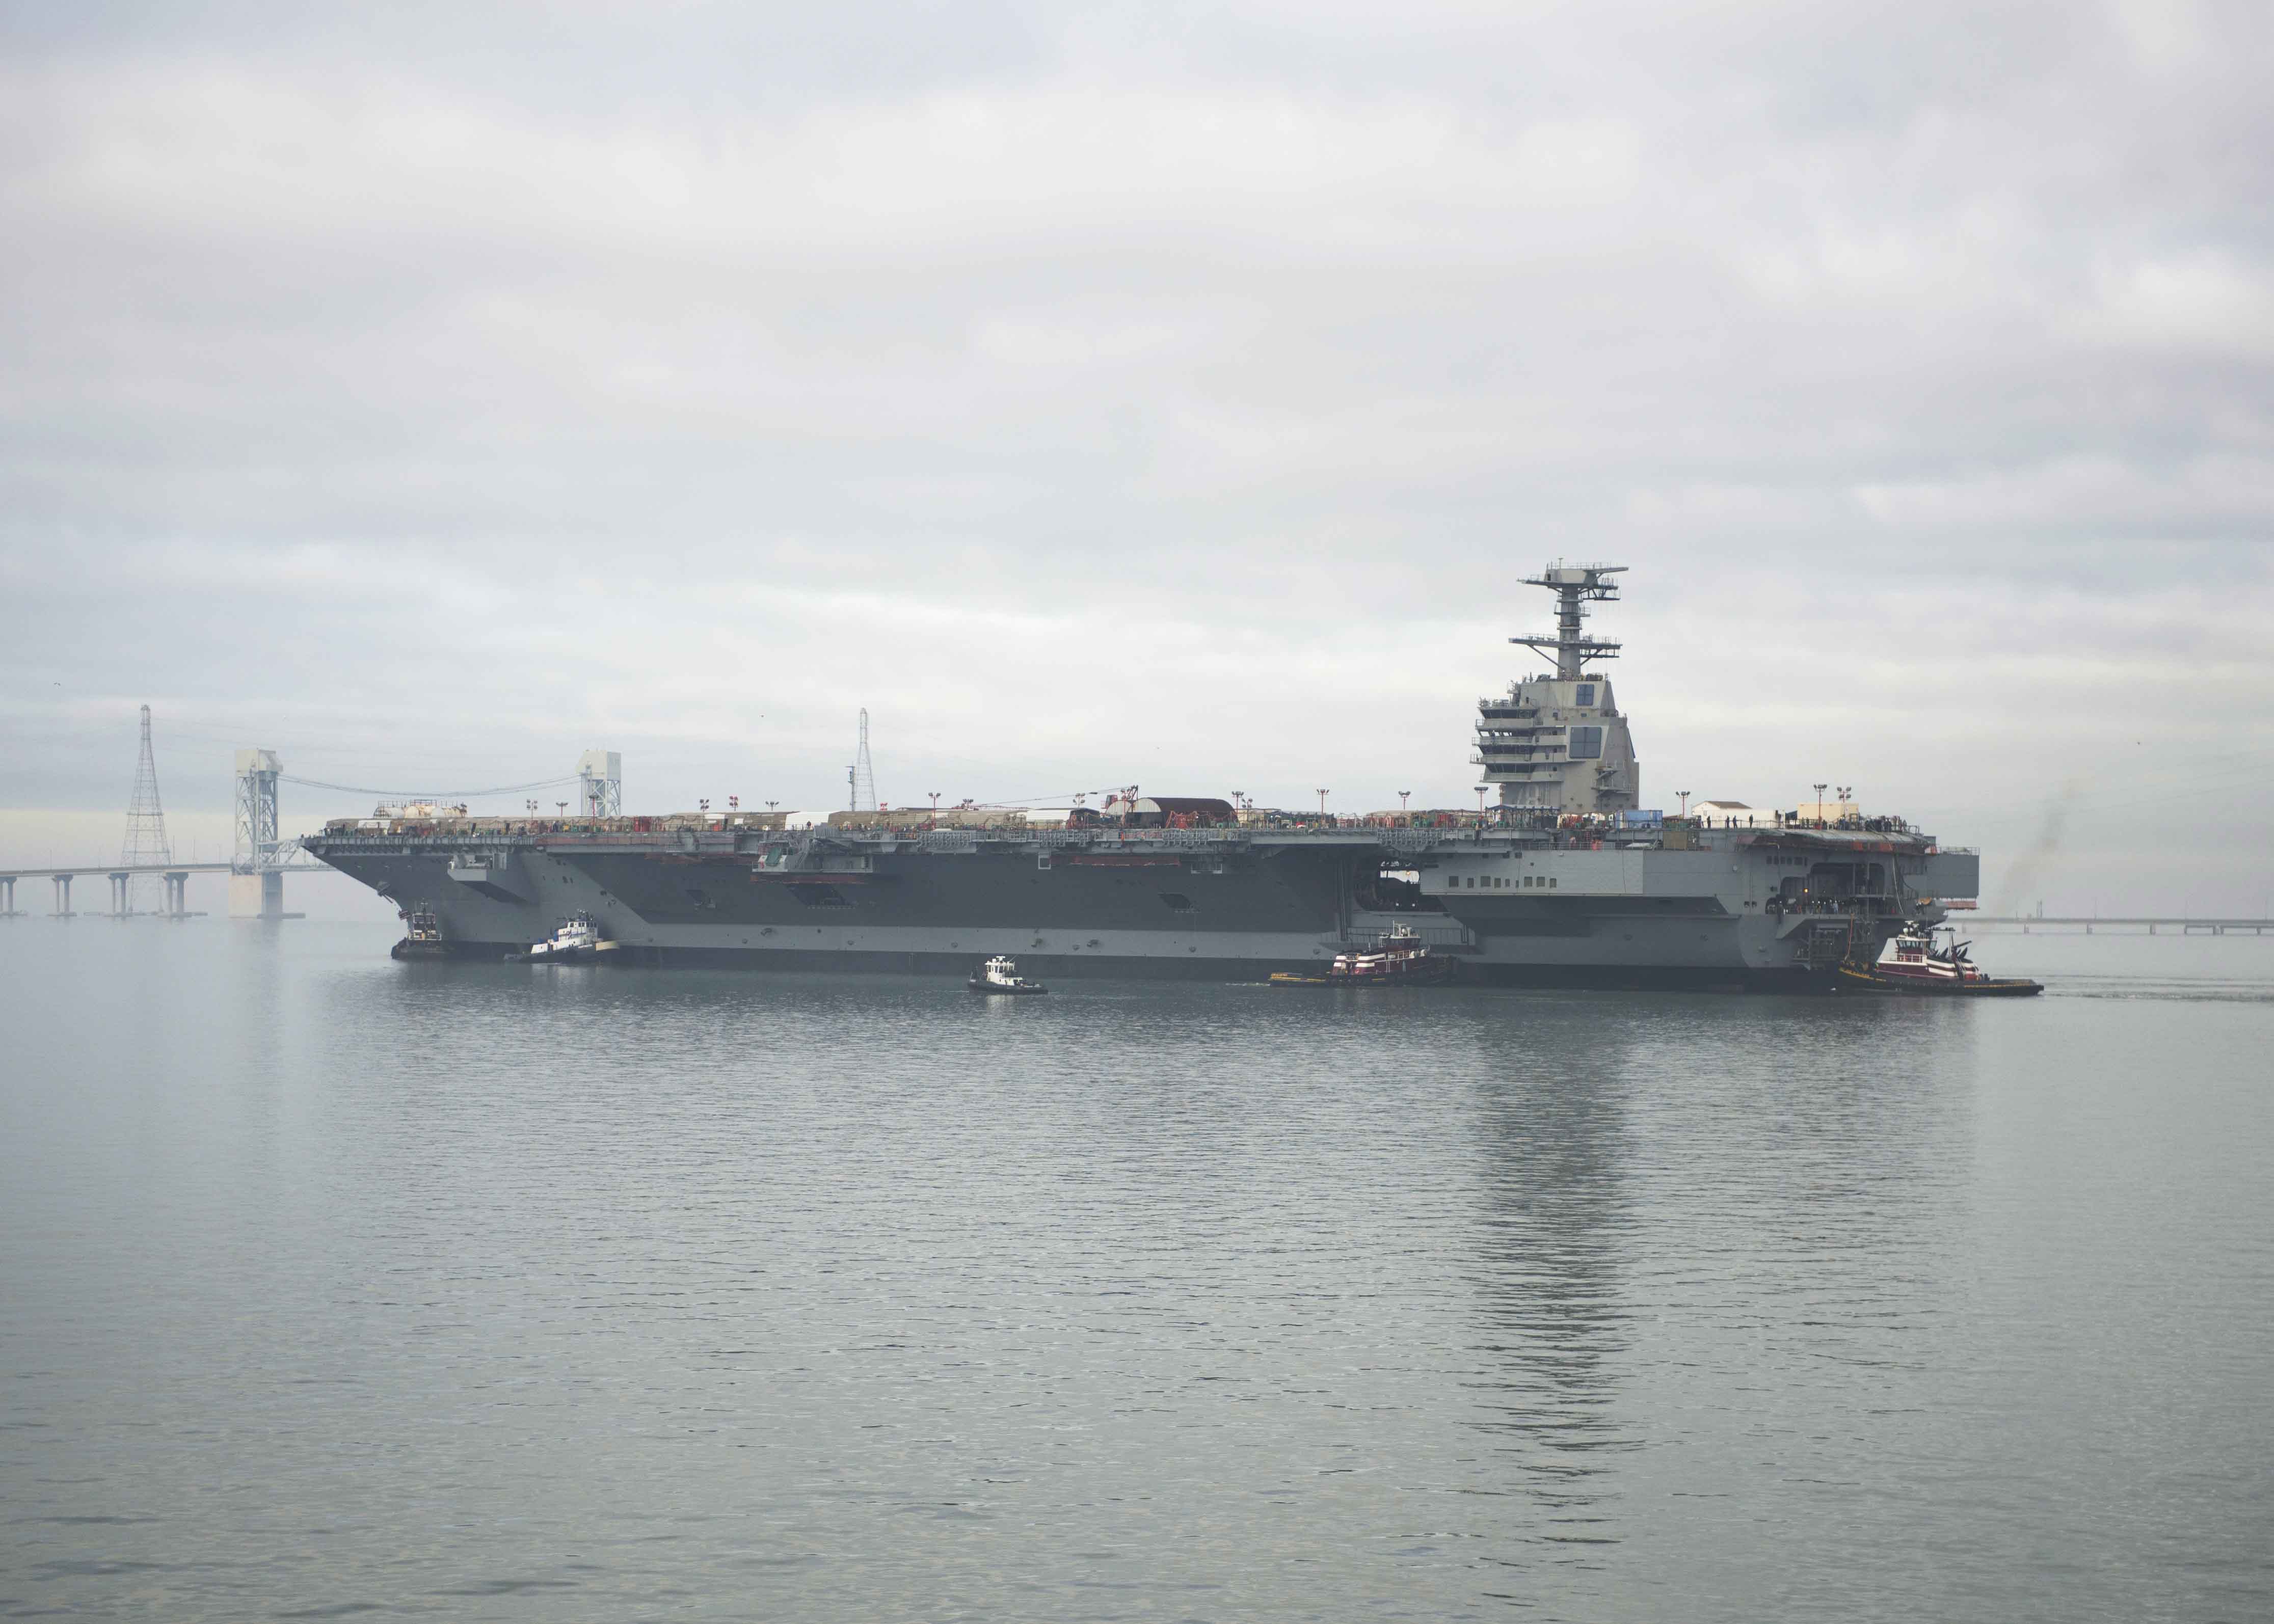 Pre-Commissioning Unit Gerald R. Ford (CVN 78) transits the James River during the ship’s launch and transit to Newport News Shipyard pier three for the final stages of construction and testing in November 2013. US Navy photo.